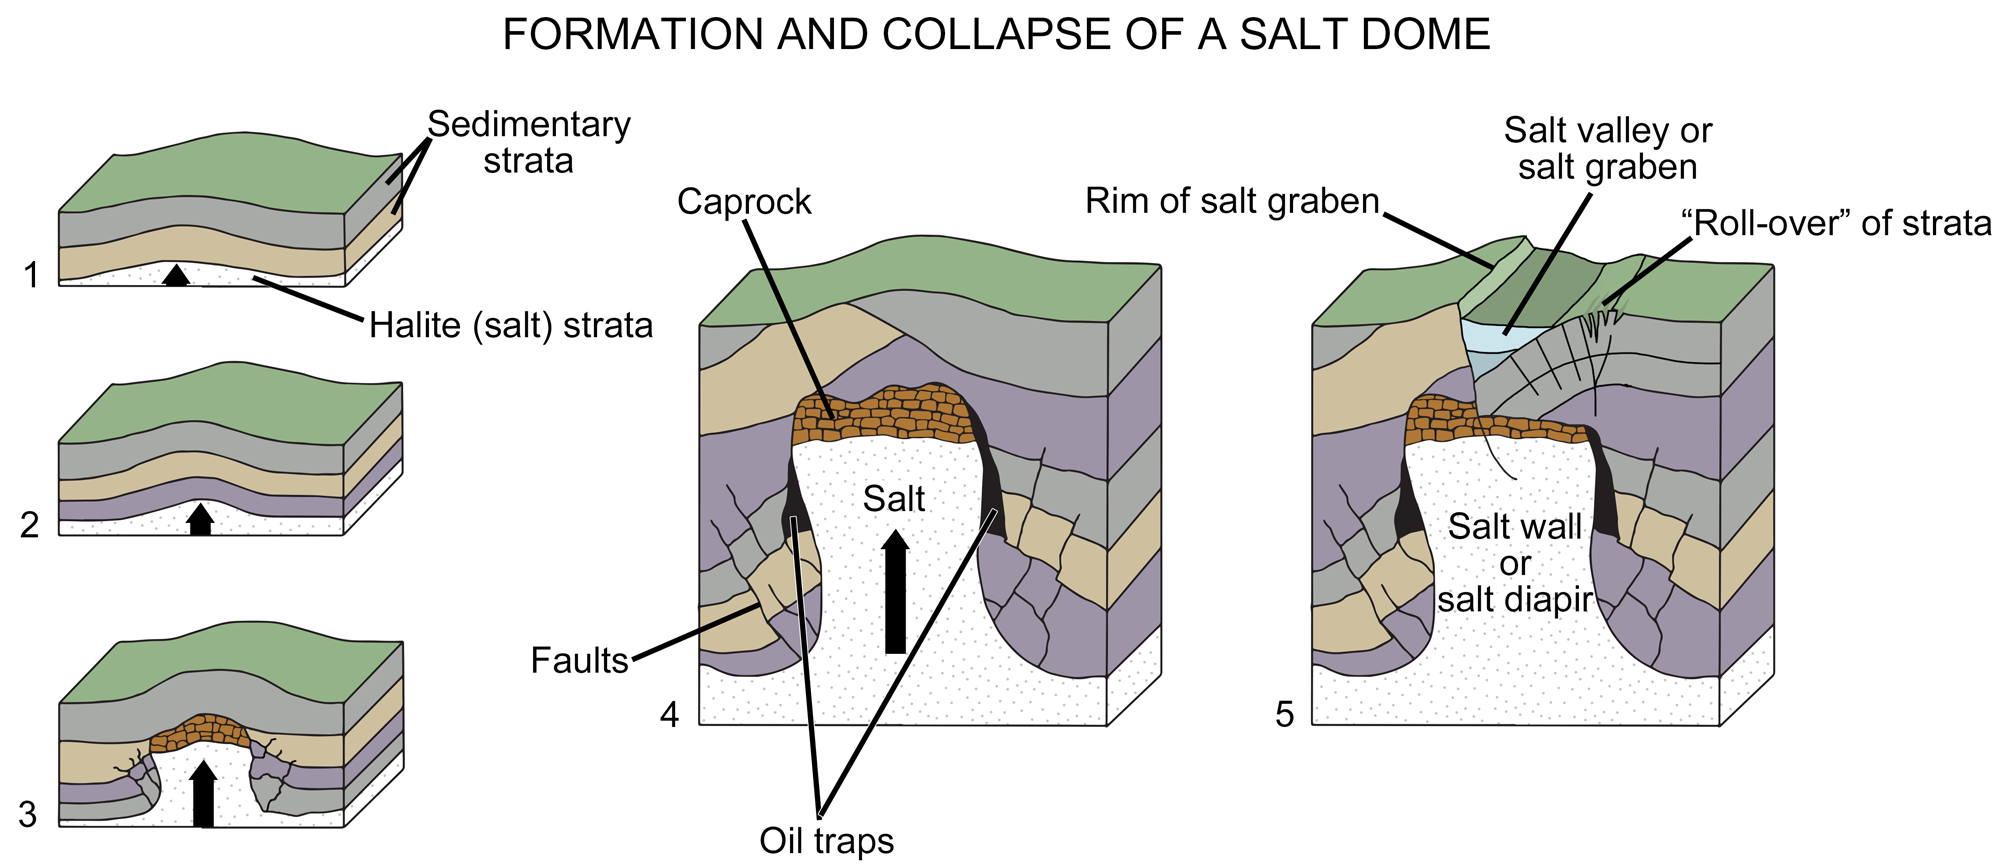 Diagrams showing the formation and collapse of a salt dome.